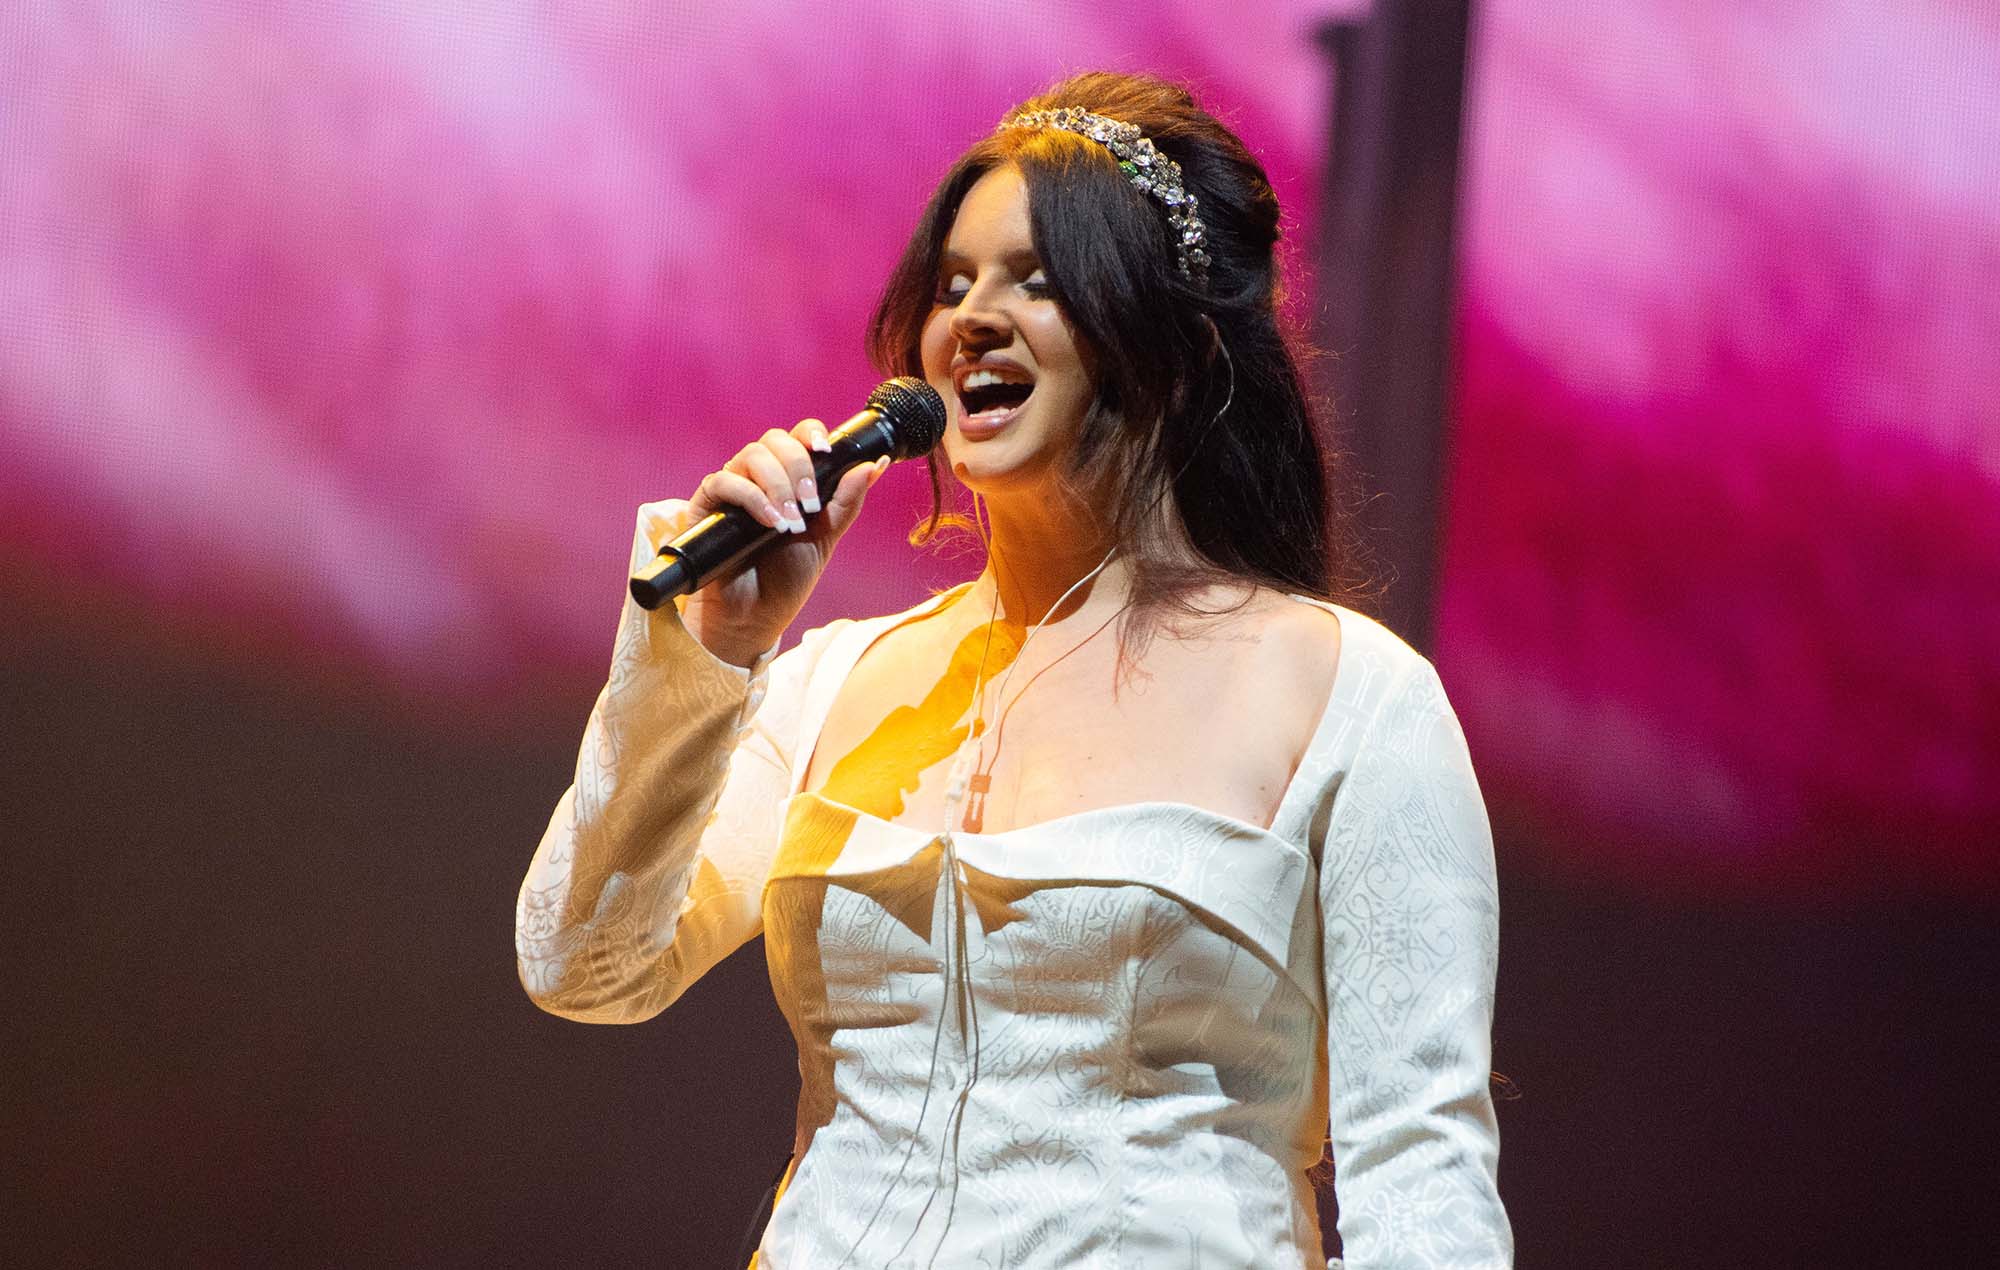 Lana Del Rey was forcibly removed from the stage by security